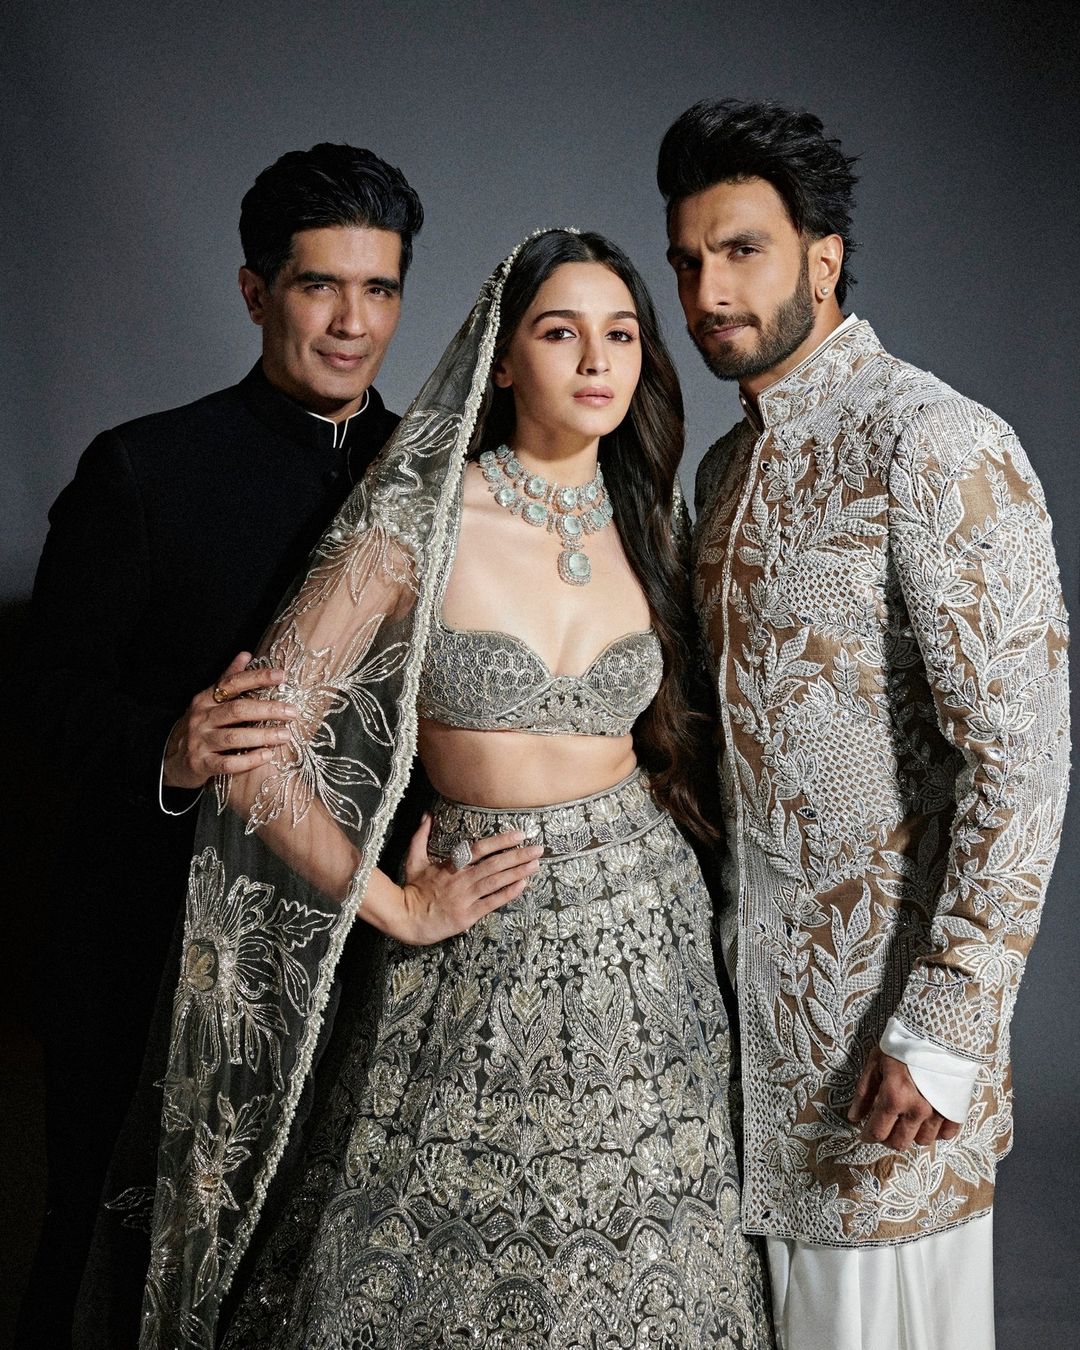 Manish Malhotra Heralds In The Era Of The Bold Bride With His Latest Couture Collection: The showstoppers. Photo Credit: www.instagram.com